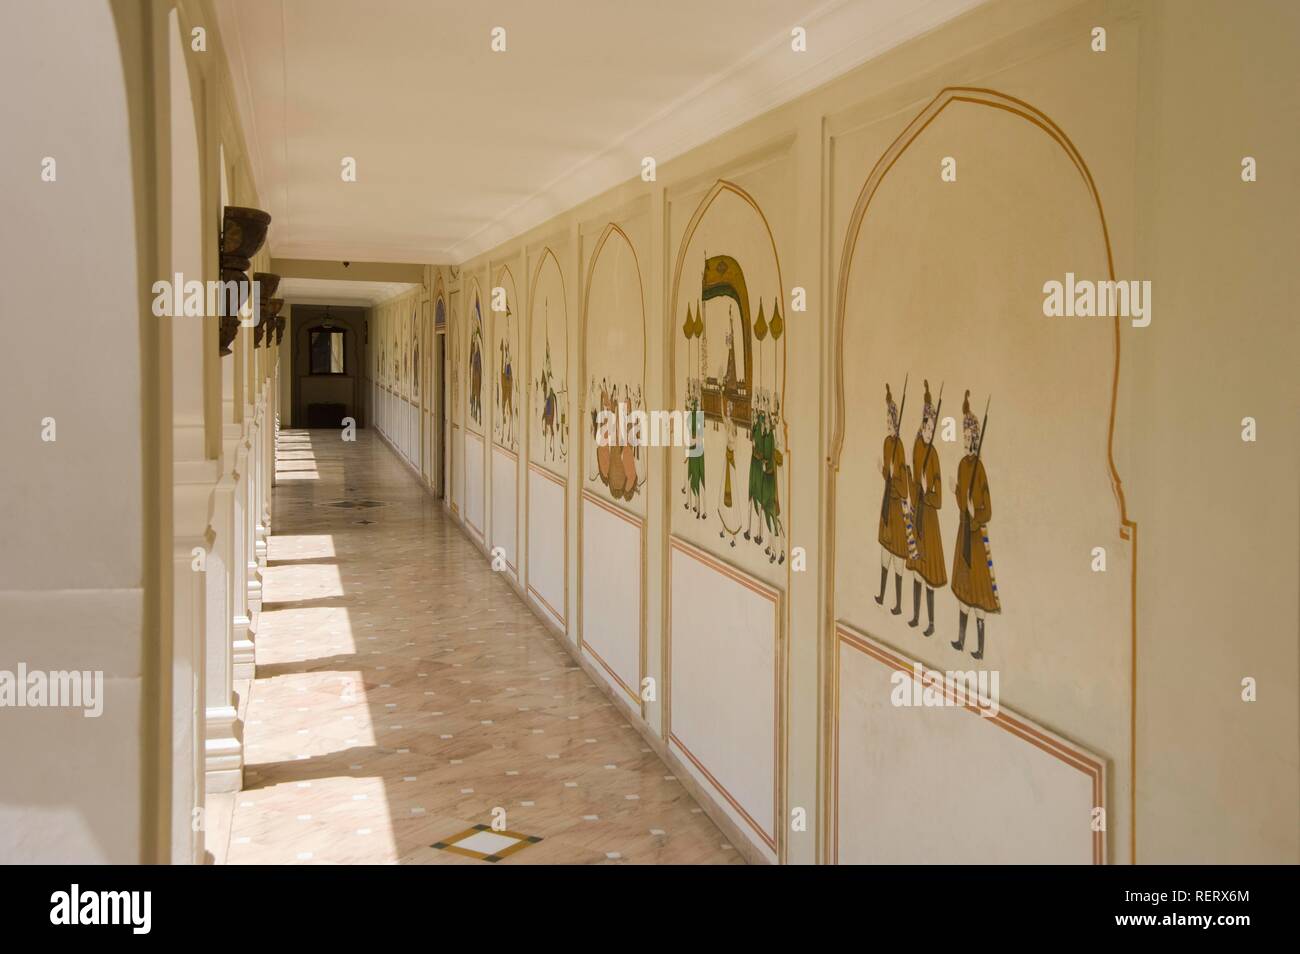 Traditional rajput wall paintings, Jaipur, Rajasthan, India, South Asia Stock Photo